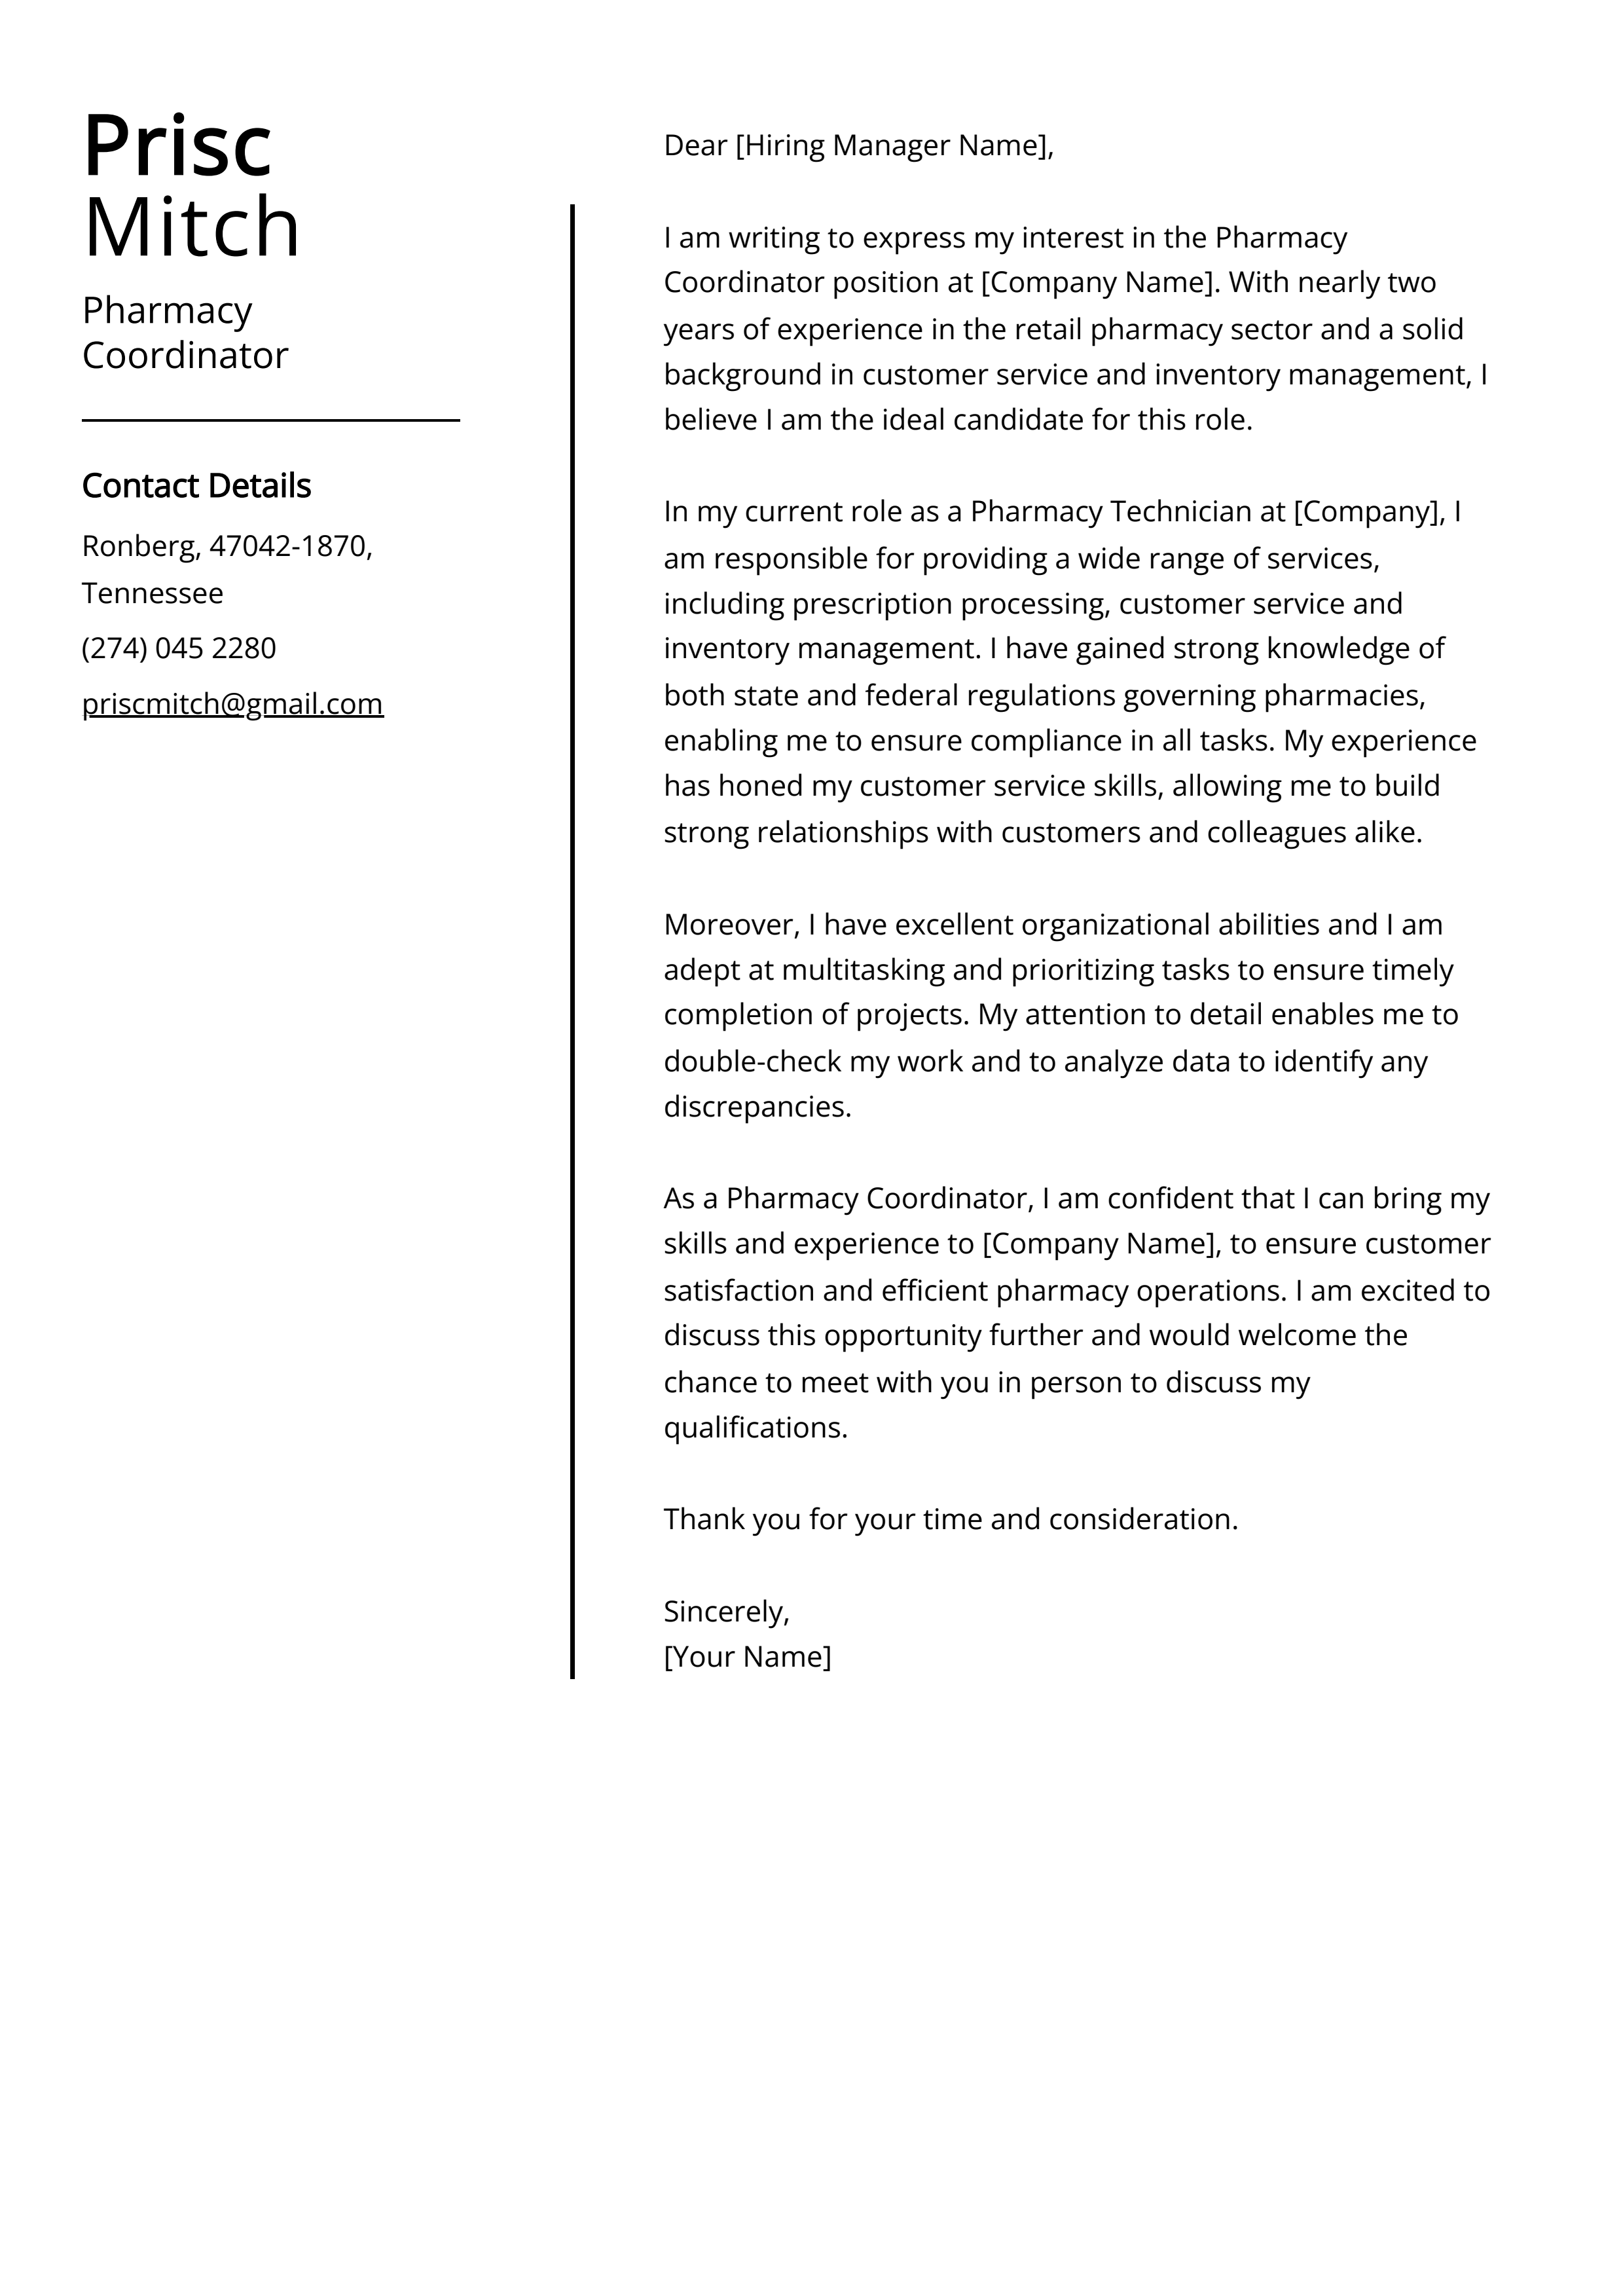 Pharmacy Coordinator Cover Letter Example